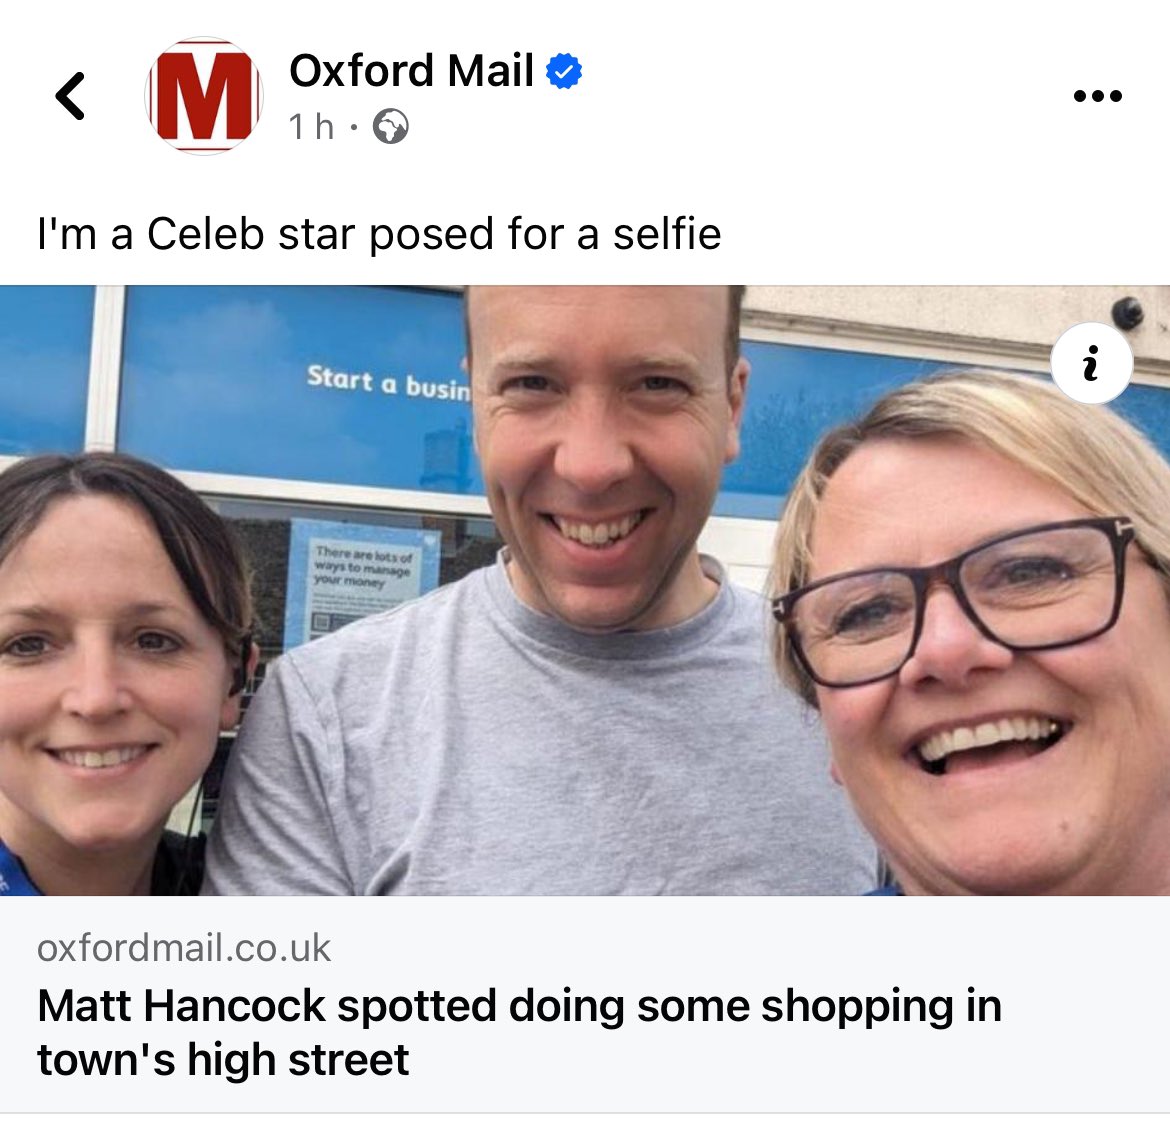 The face of pure Evil #MidazolamMatt

@MattHancock should be in the dock in The Hague for the mass murder of our elderly in care homes & hospitals during lockdown using lethal doses of #Midazolam & Morphine under #DeathProtocol  #NG163 bit instead he’s out shopping in Whitney .